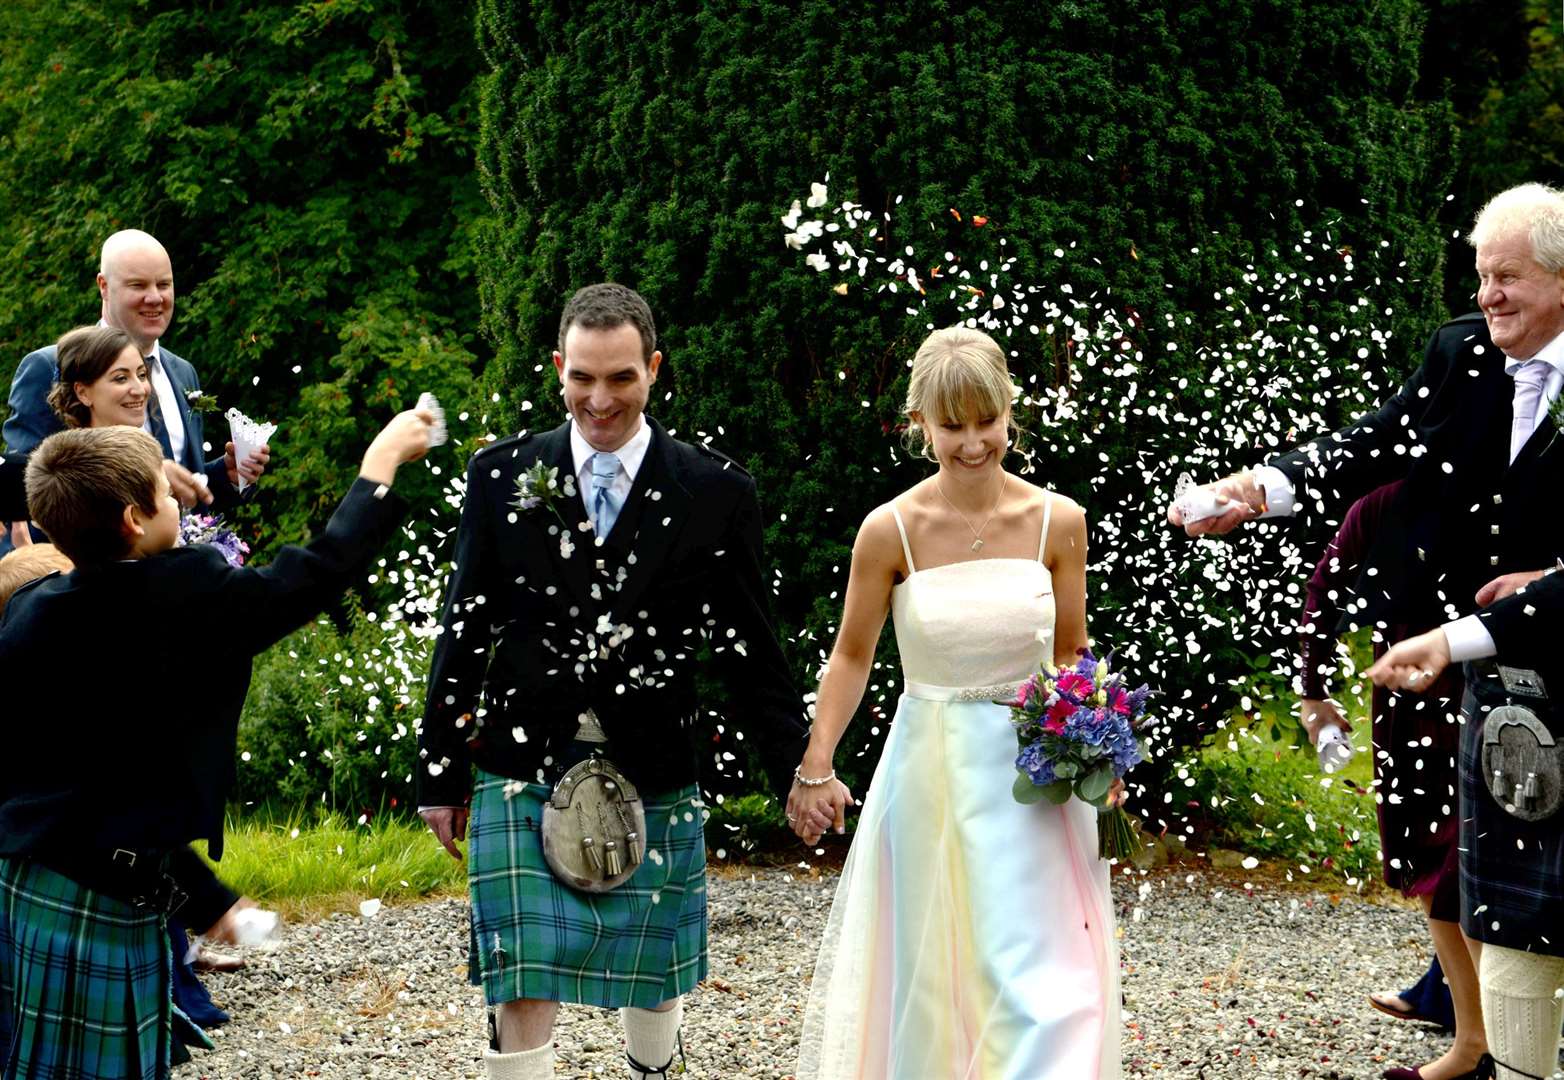 Castle Leod Wedding..Andrew Traill and Ashley Traill. Ashley Traill wore a specially designed rainbow dress to signify the year it is been and the bright hope of the future..Picture: James Mackenzie..